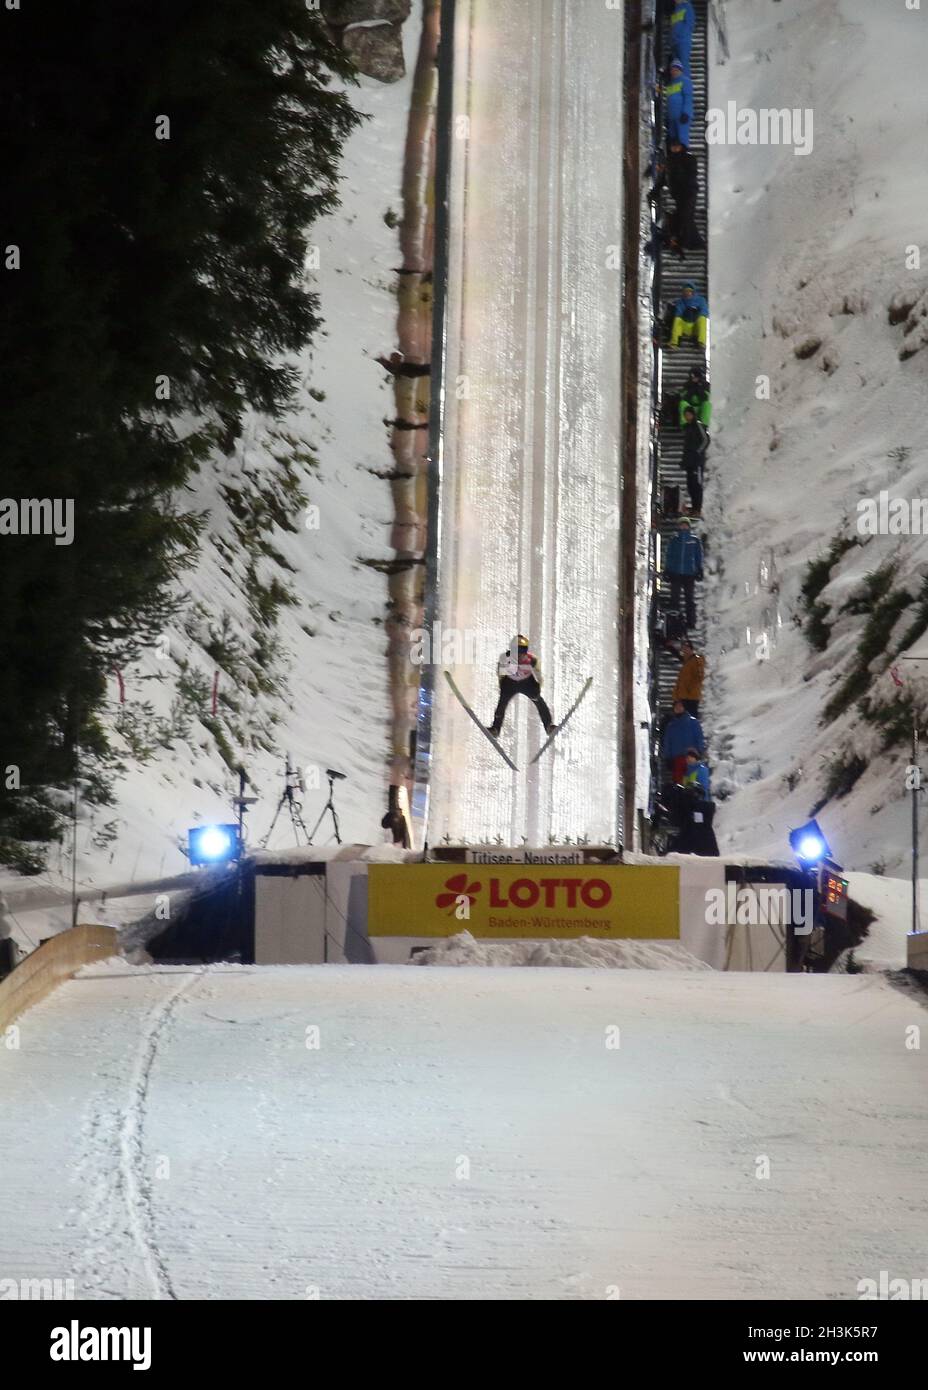 FIS World Cup Ski Jumping 17-18, Neustadt, individual competition Stock Photo